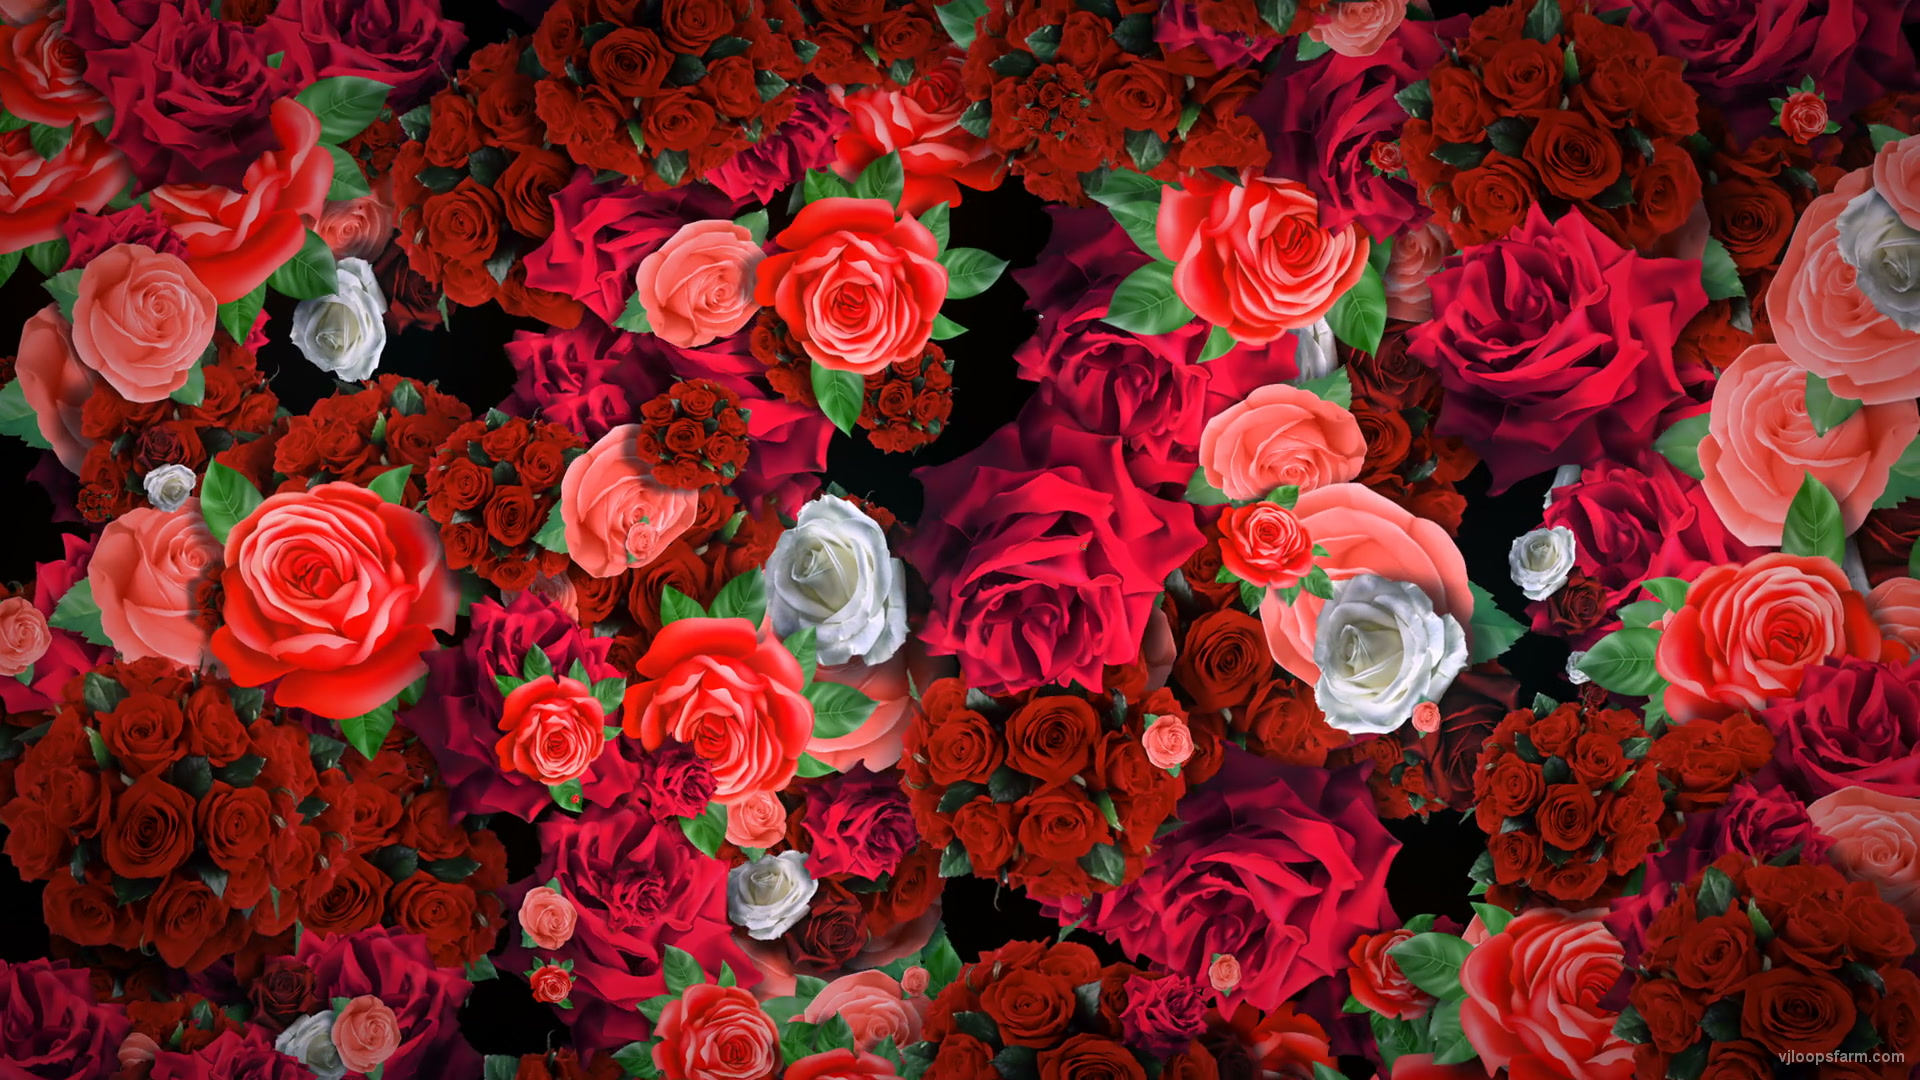 Festive Looped Decoration of Roses Flowers Counter-Move Flows